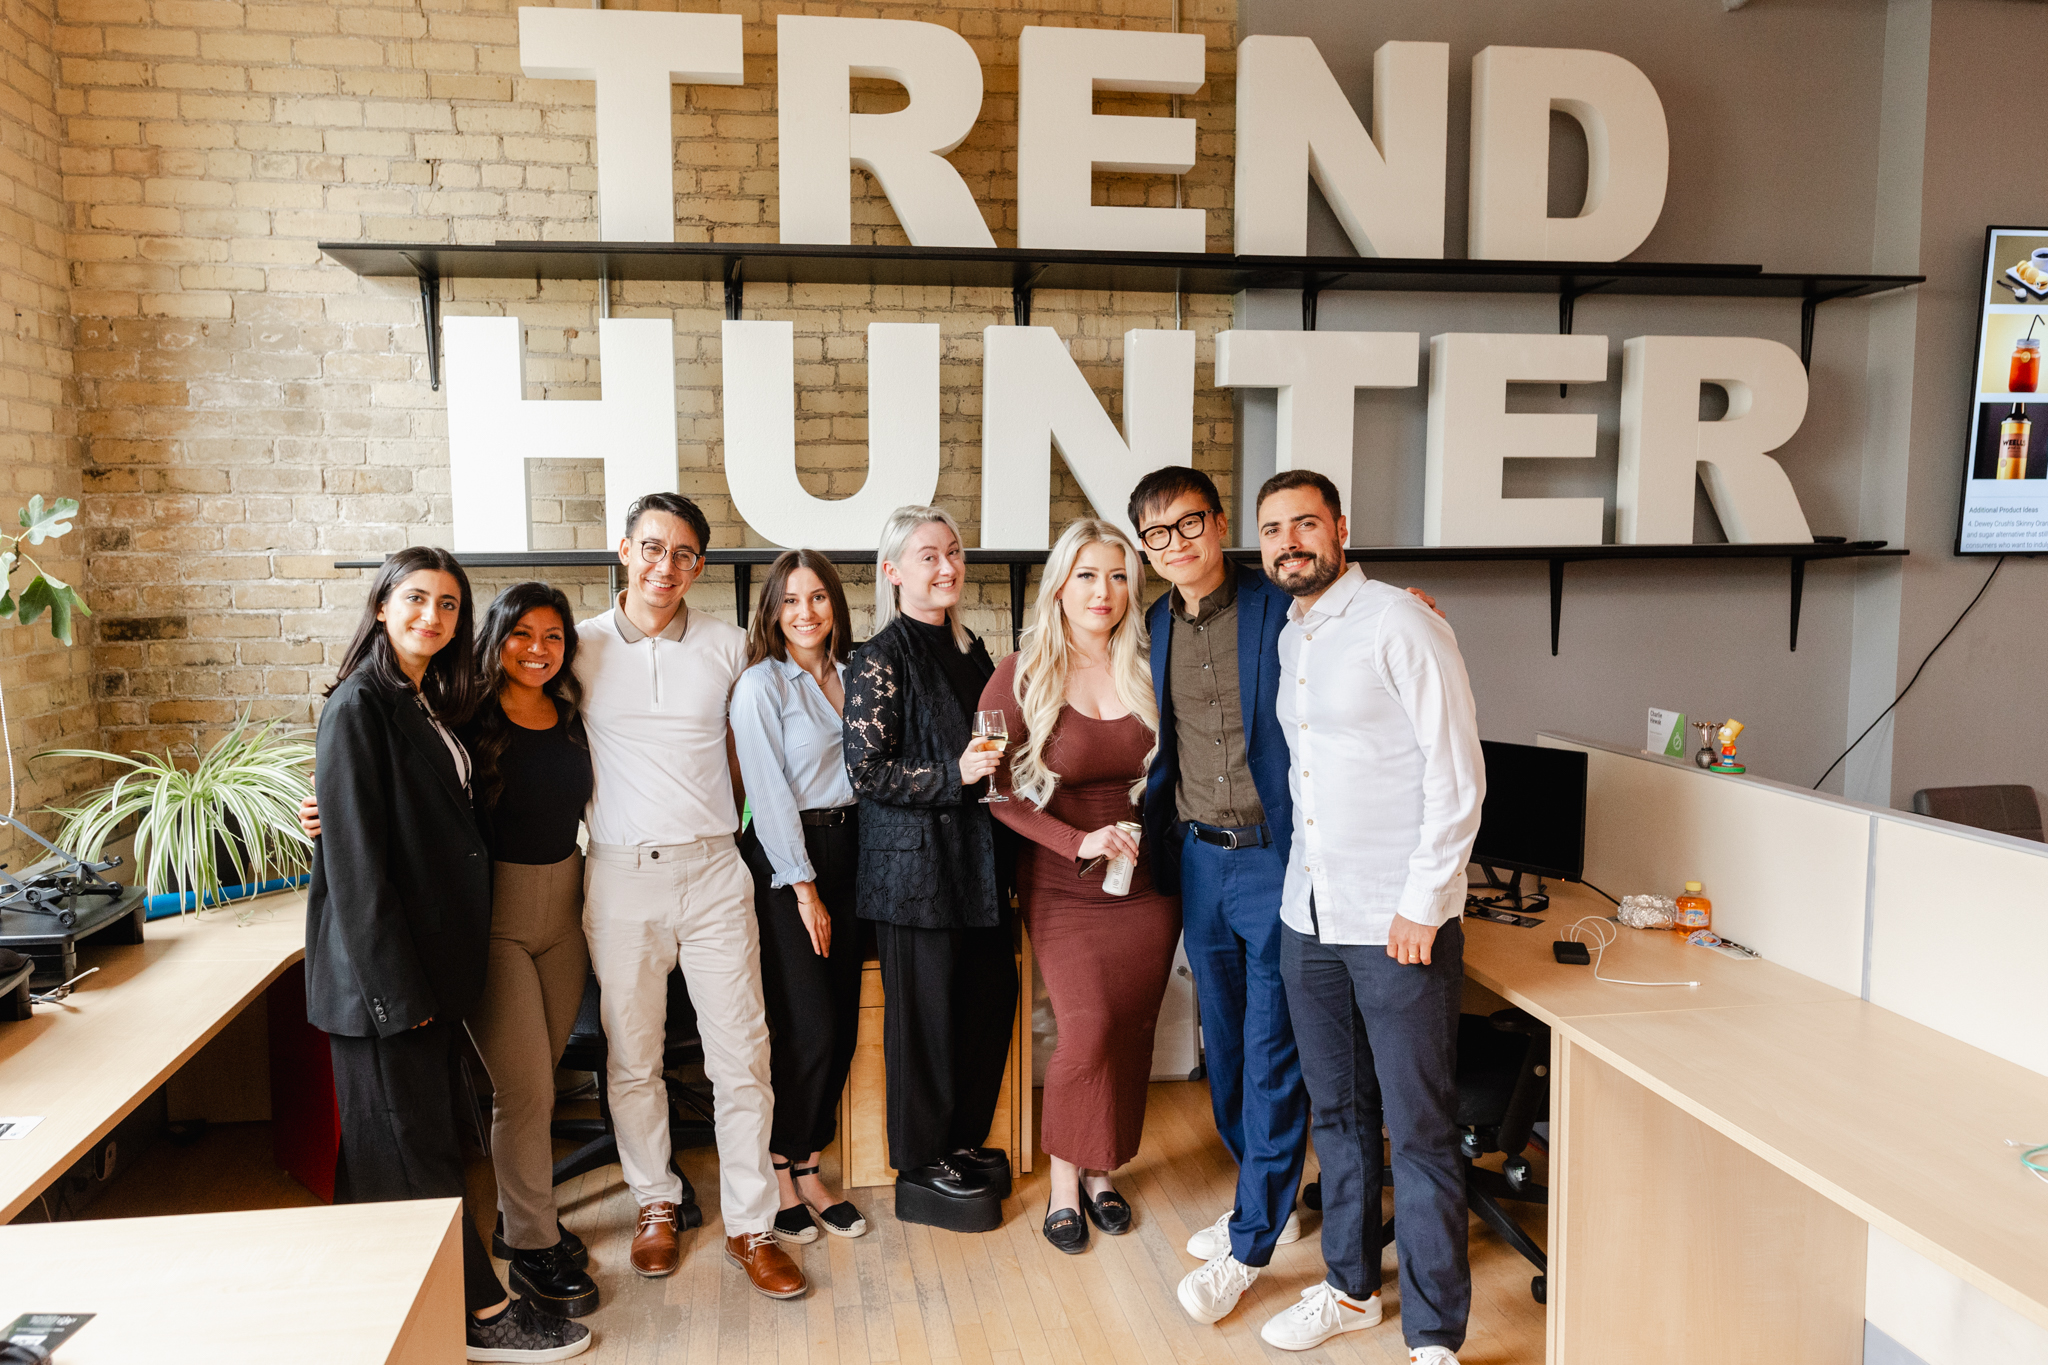 A group of people posing in front of a trend hunter sign captured by event photography.